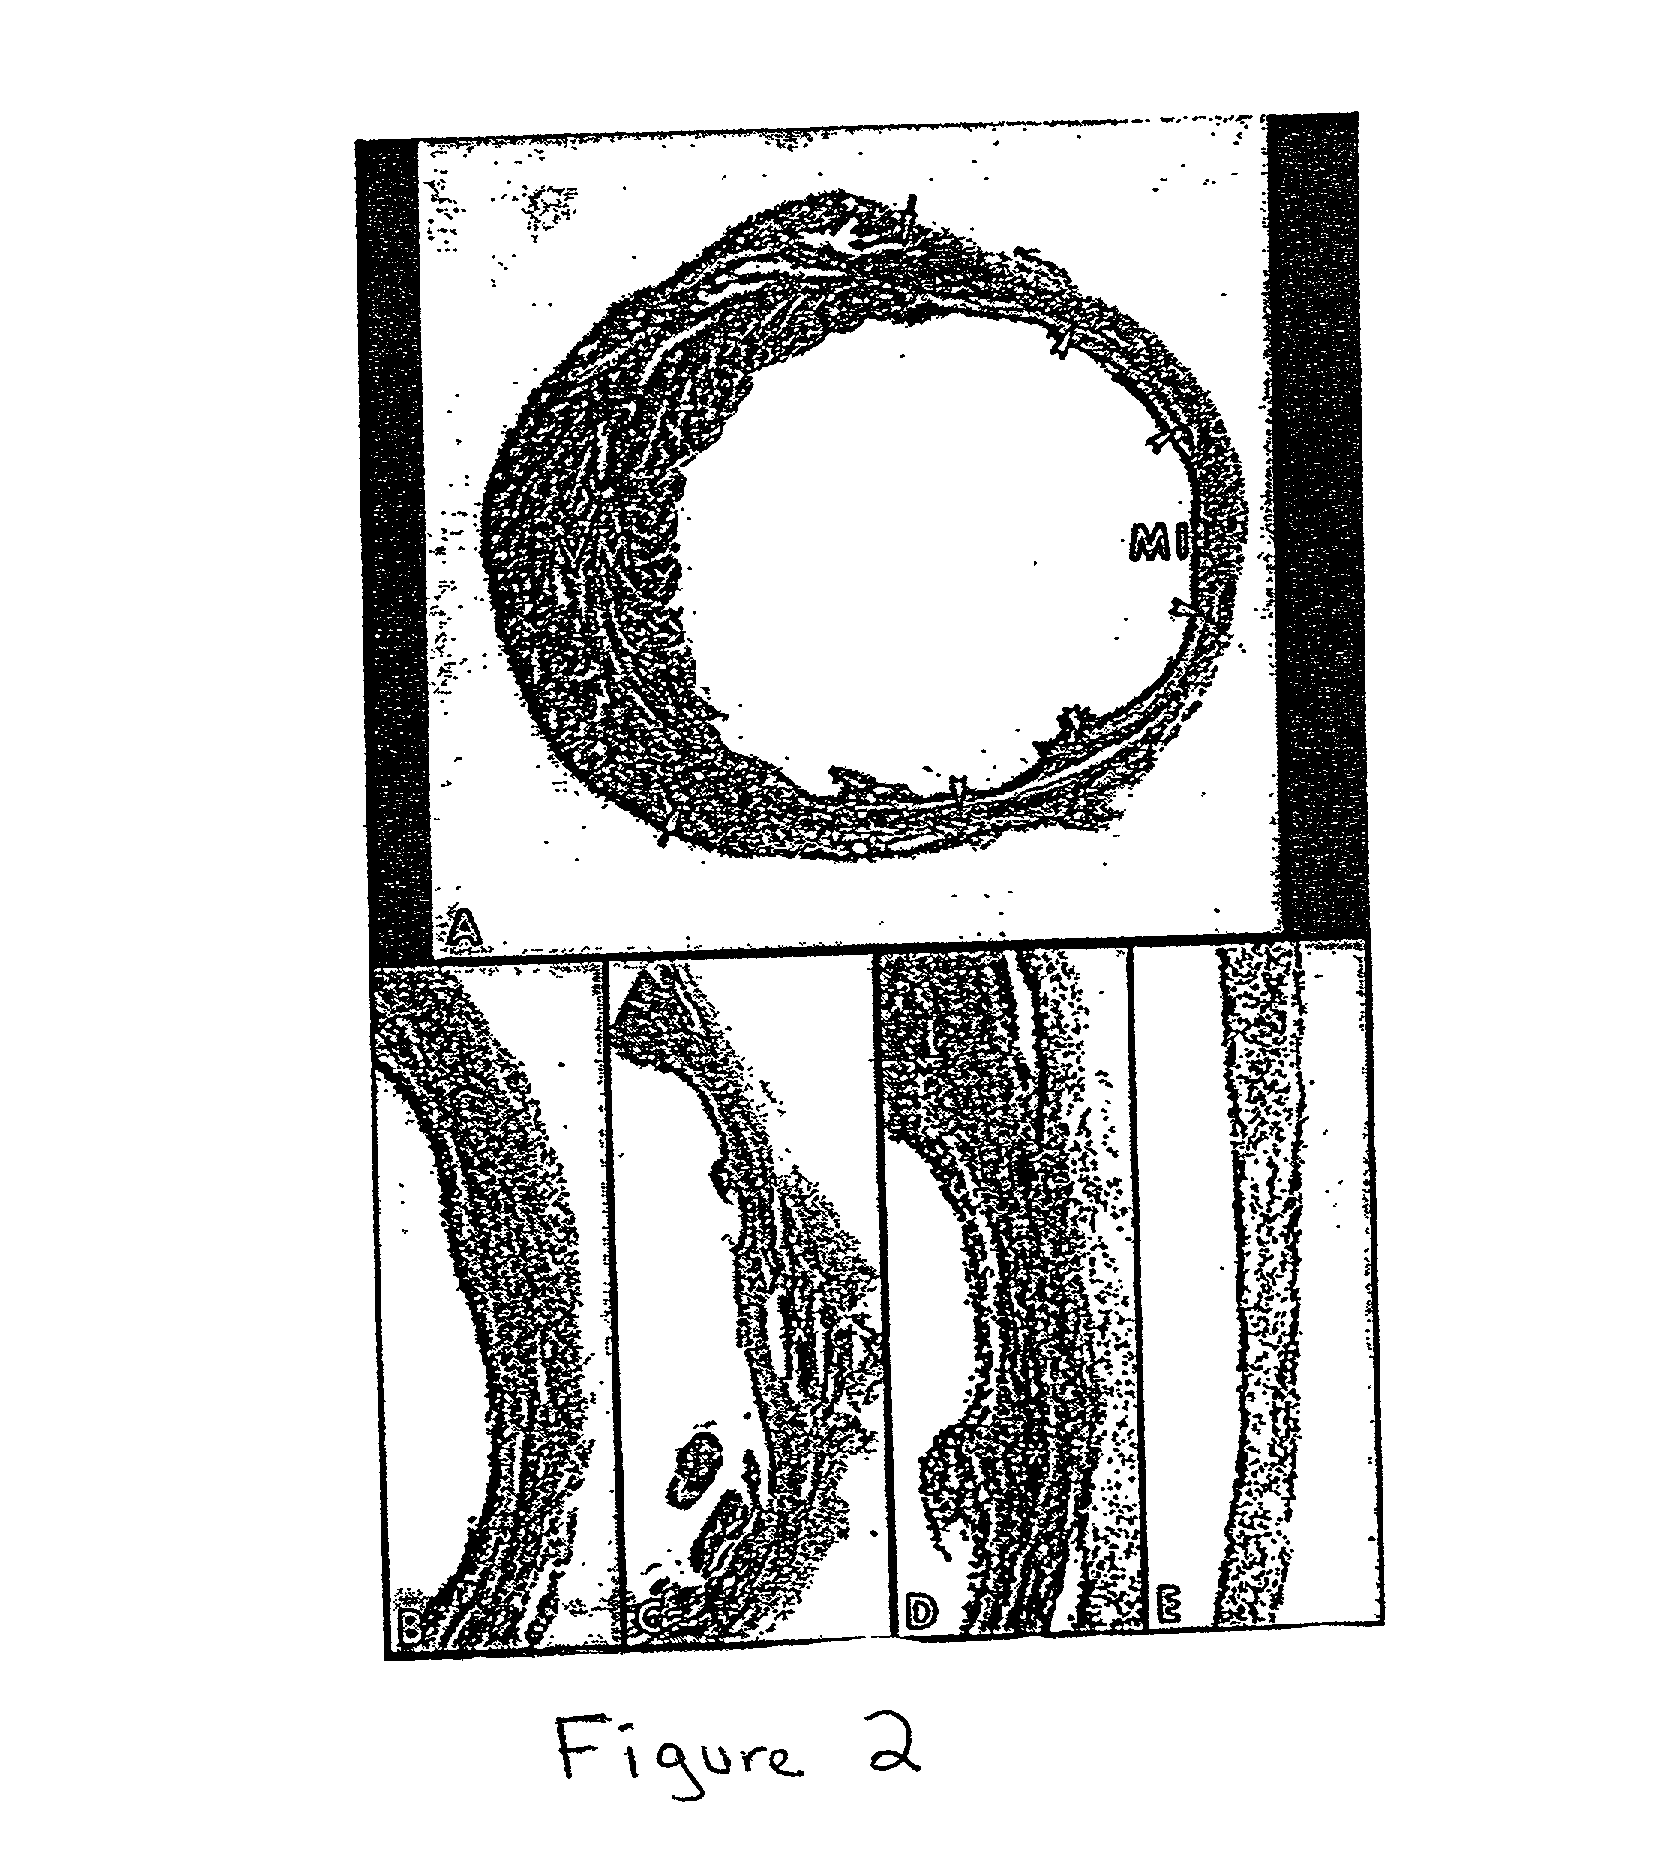 Methods and compositions for the repair and/or regeneration of damaged myocardium